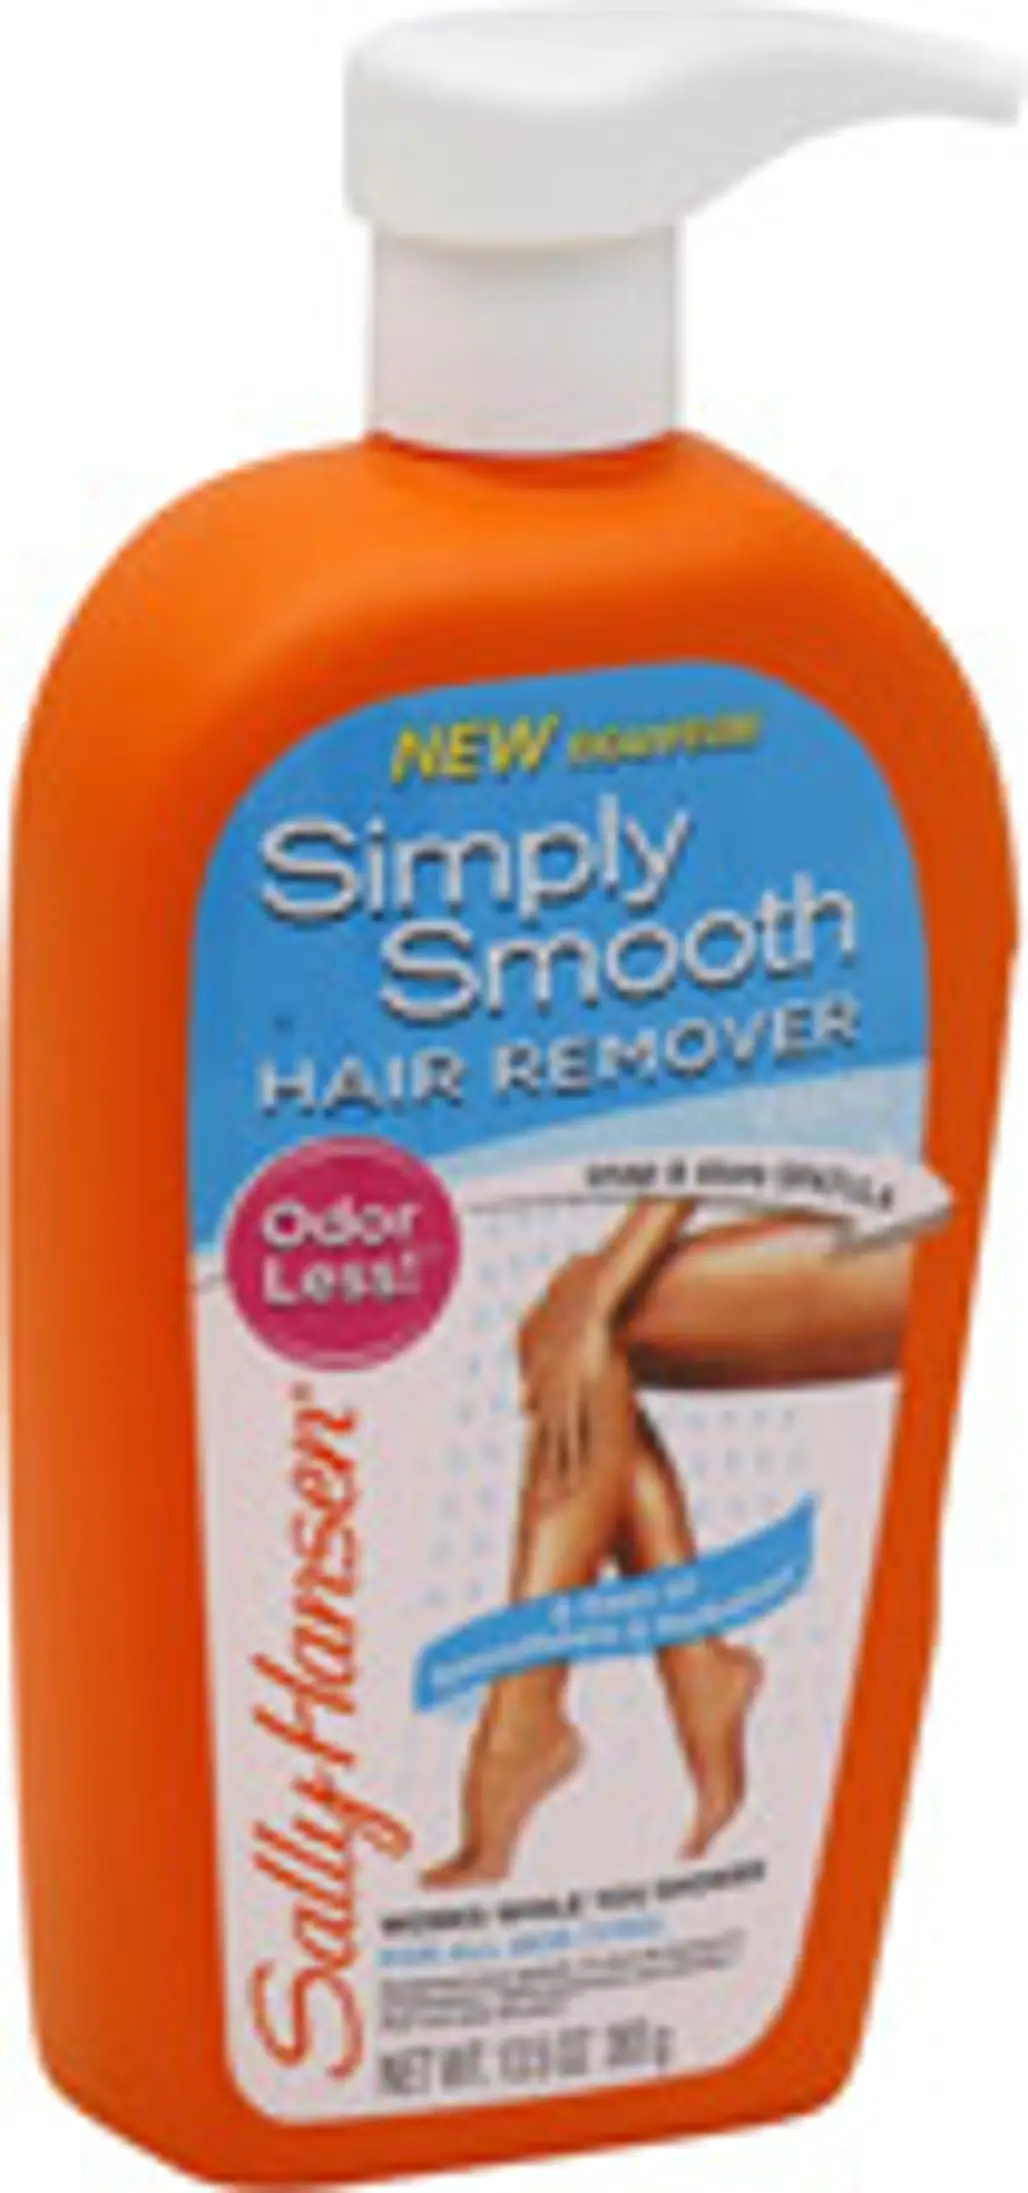 Sally Hansen Simple Smooth Hair Remover Creme for All Skin Types